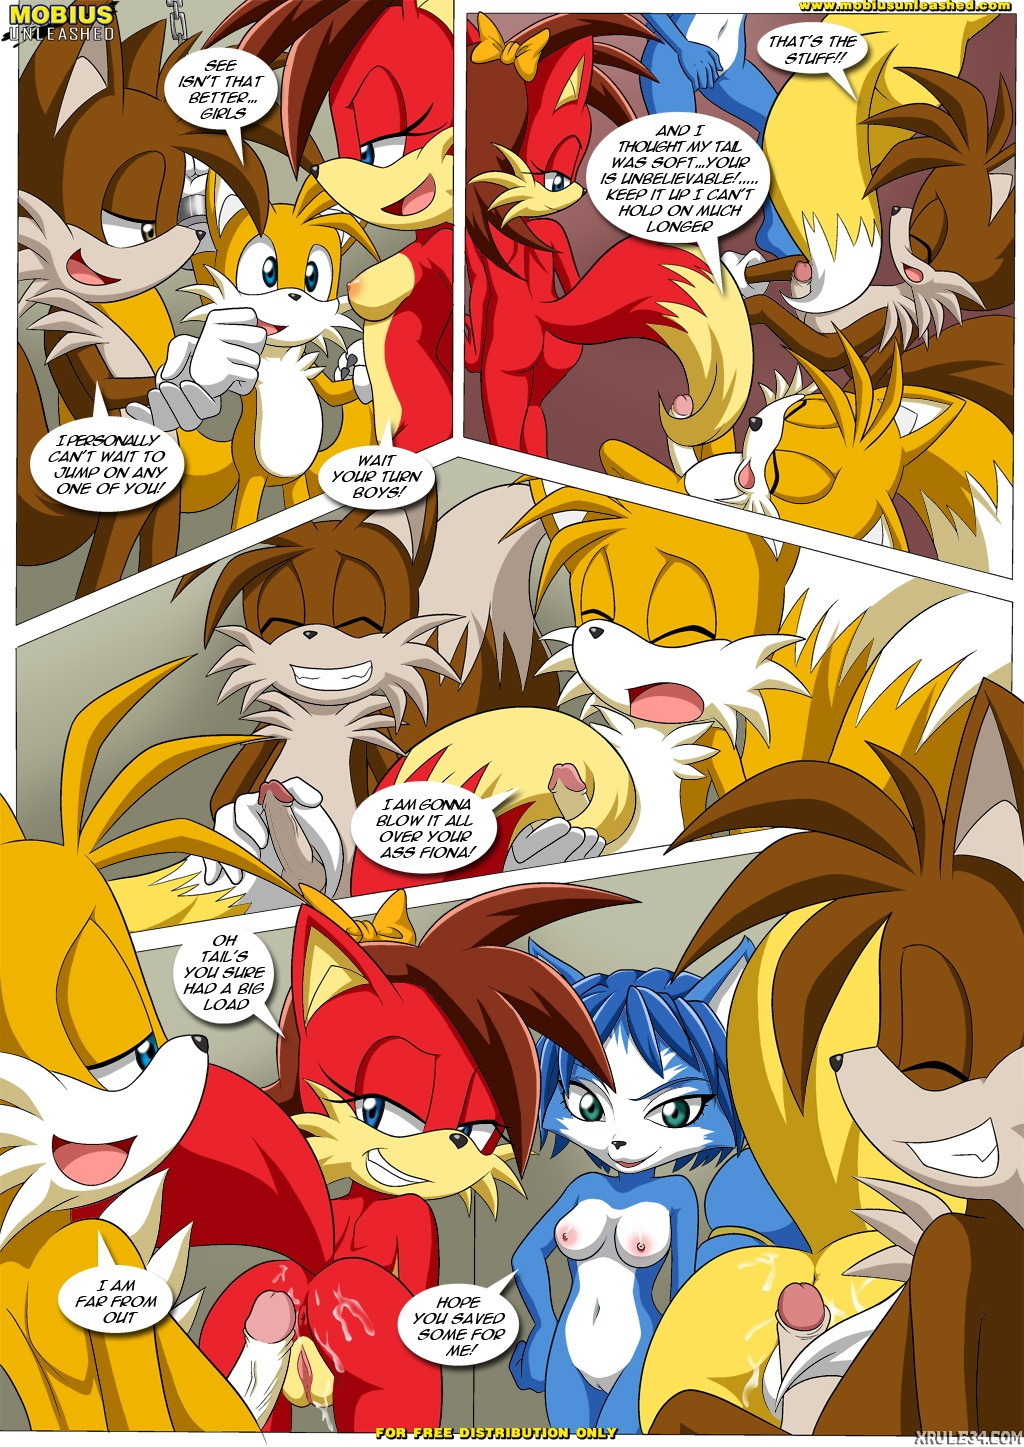 Foxxxes^2 - 2 Much Tail - Page 3